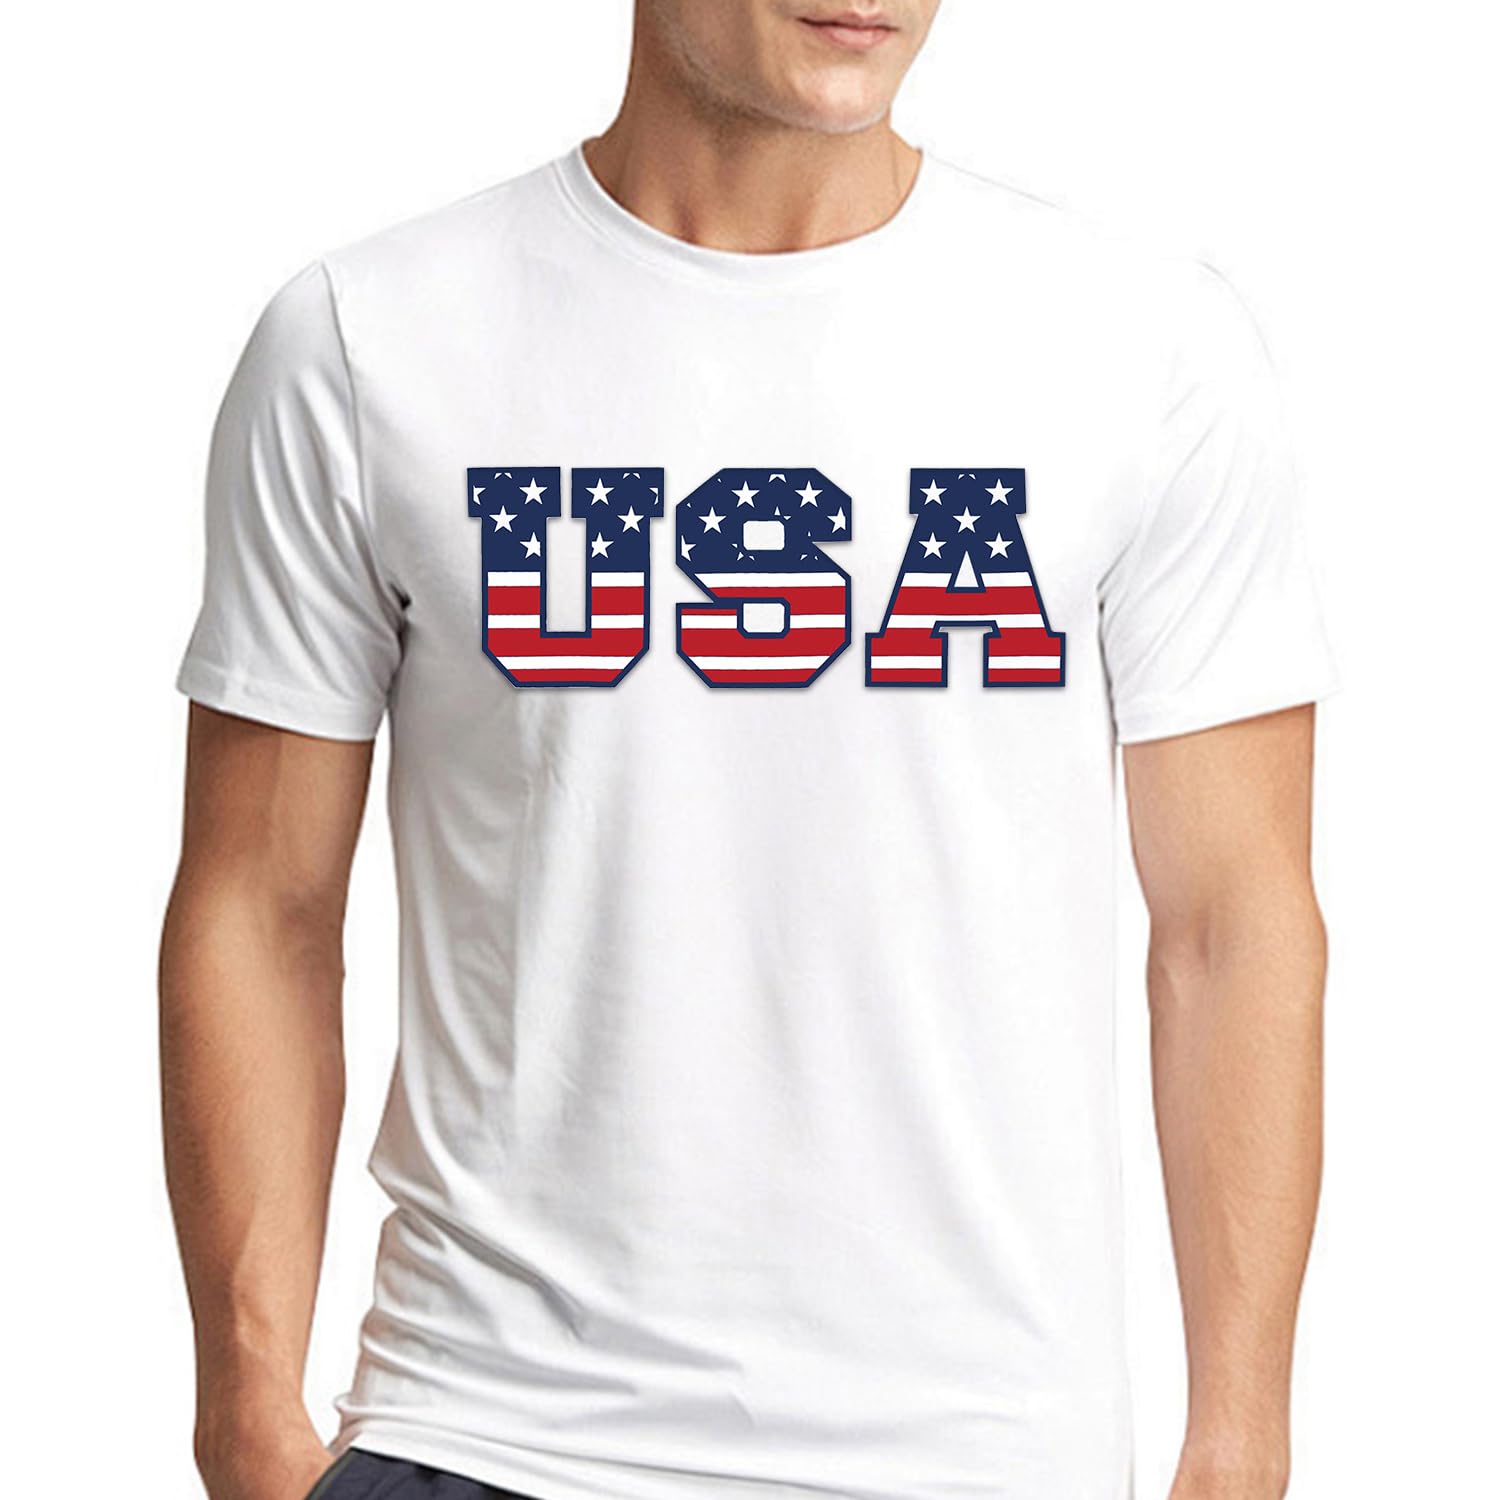 SUWATOIN USA 4th of July Shirts for Men American Flag Short Sleeve Patriotic Independence Day Tee Top